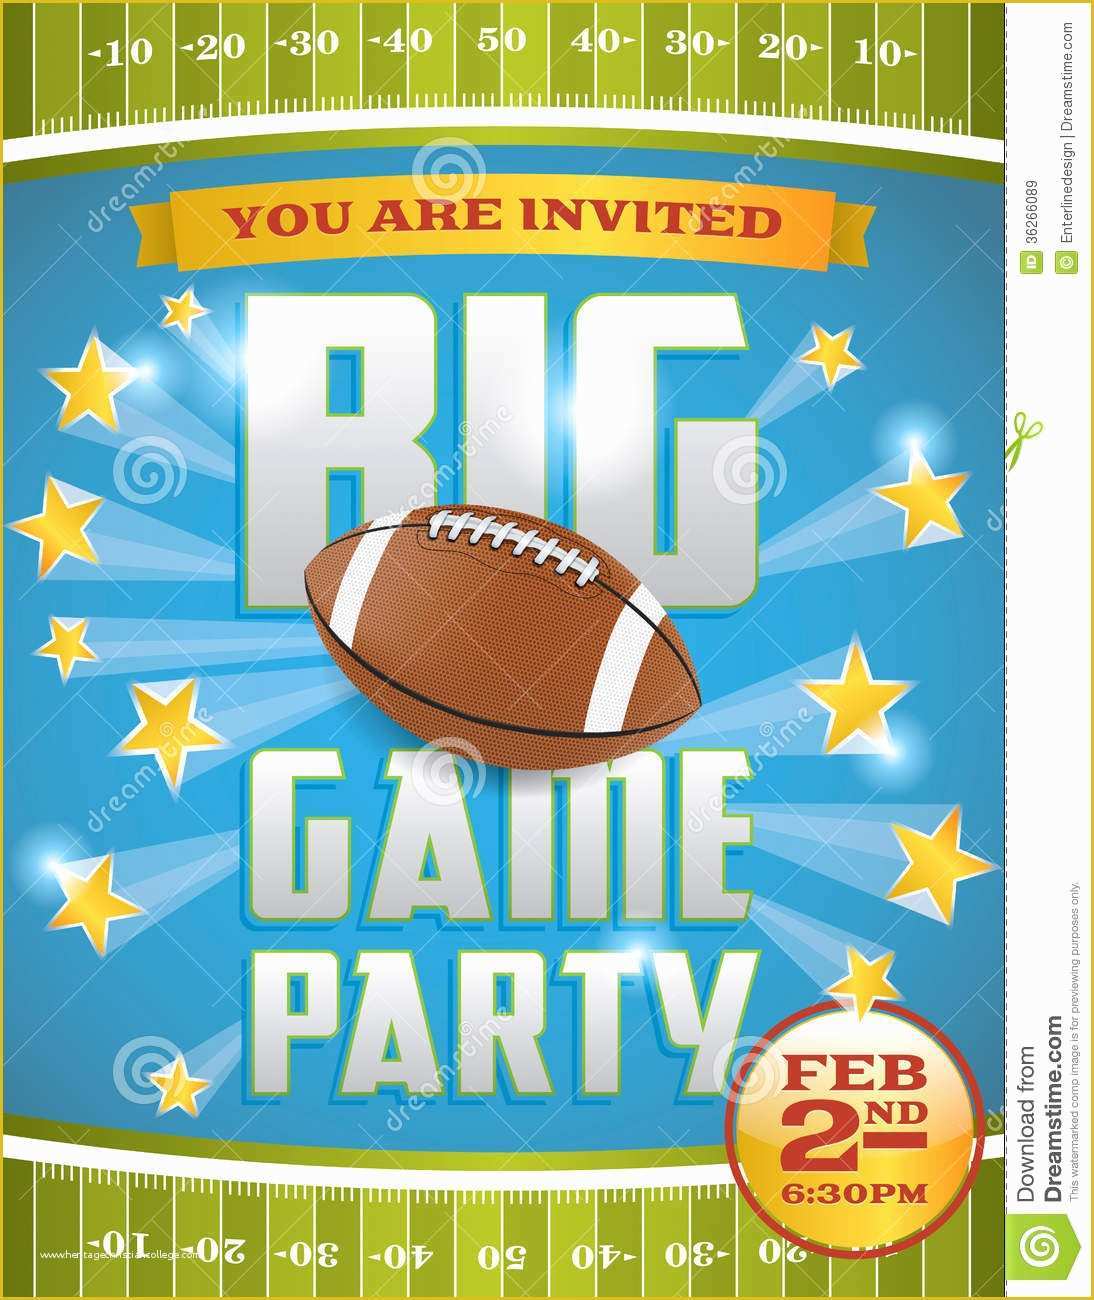 Free Tailgate Party Flyer Template Of American Football Party Flyer Royalty Free Stock